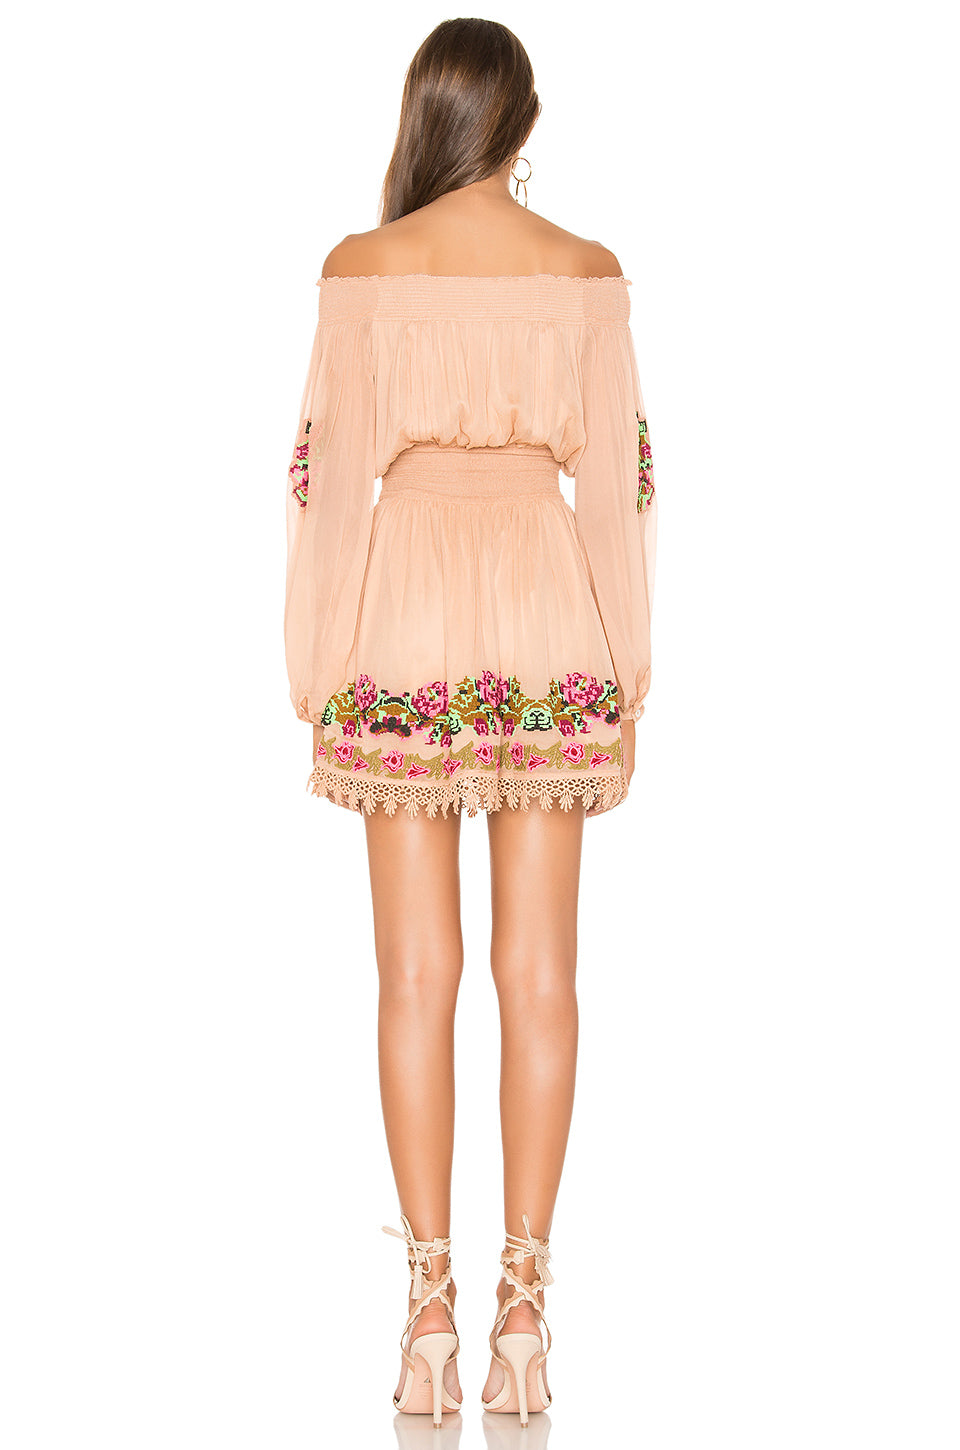 Calista Embroidered Dress in NUDE